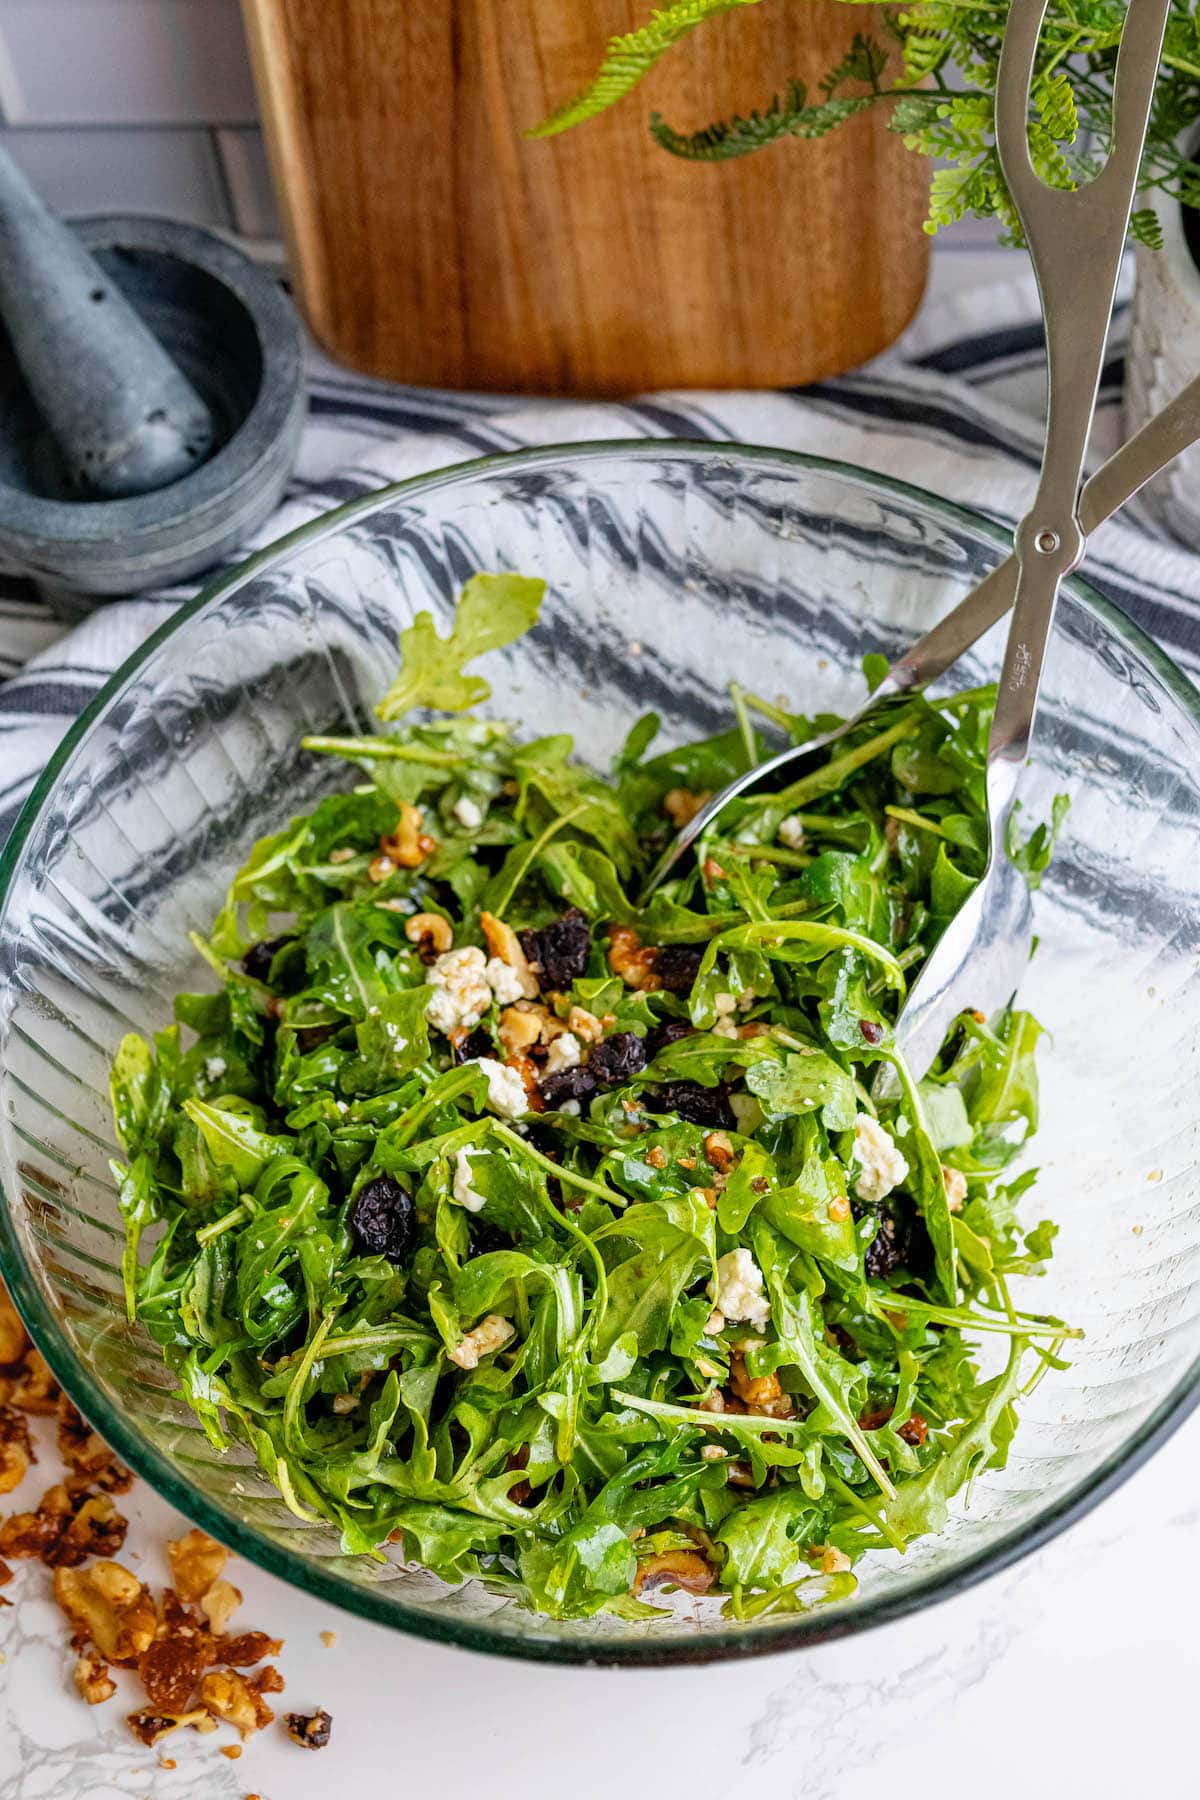 Arugula salad with walnuts, dry fruit, and cheese